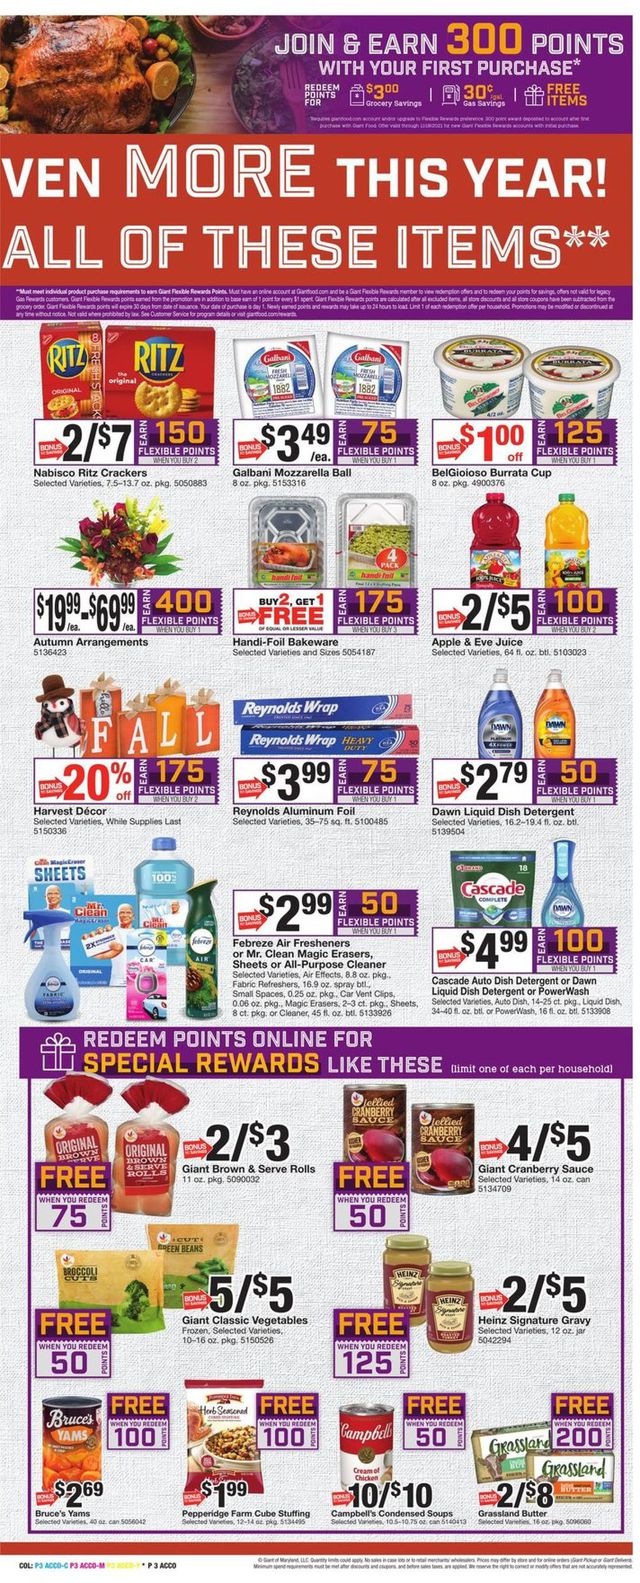 Giant Food Ad from 11/12/2021